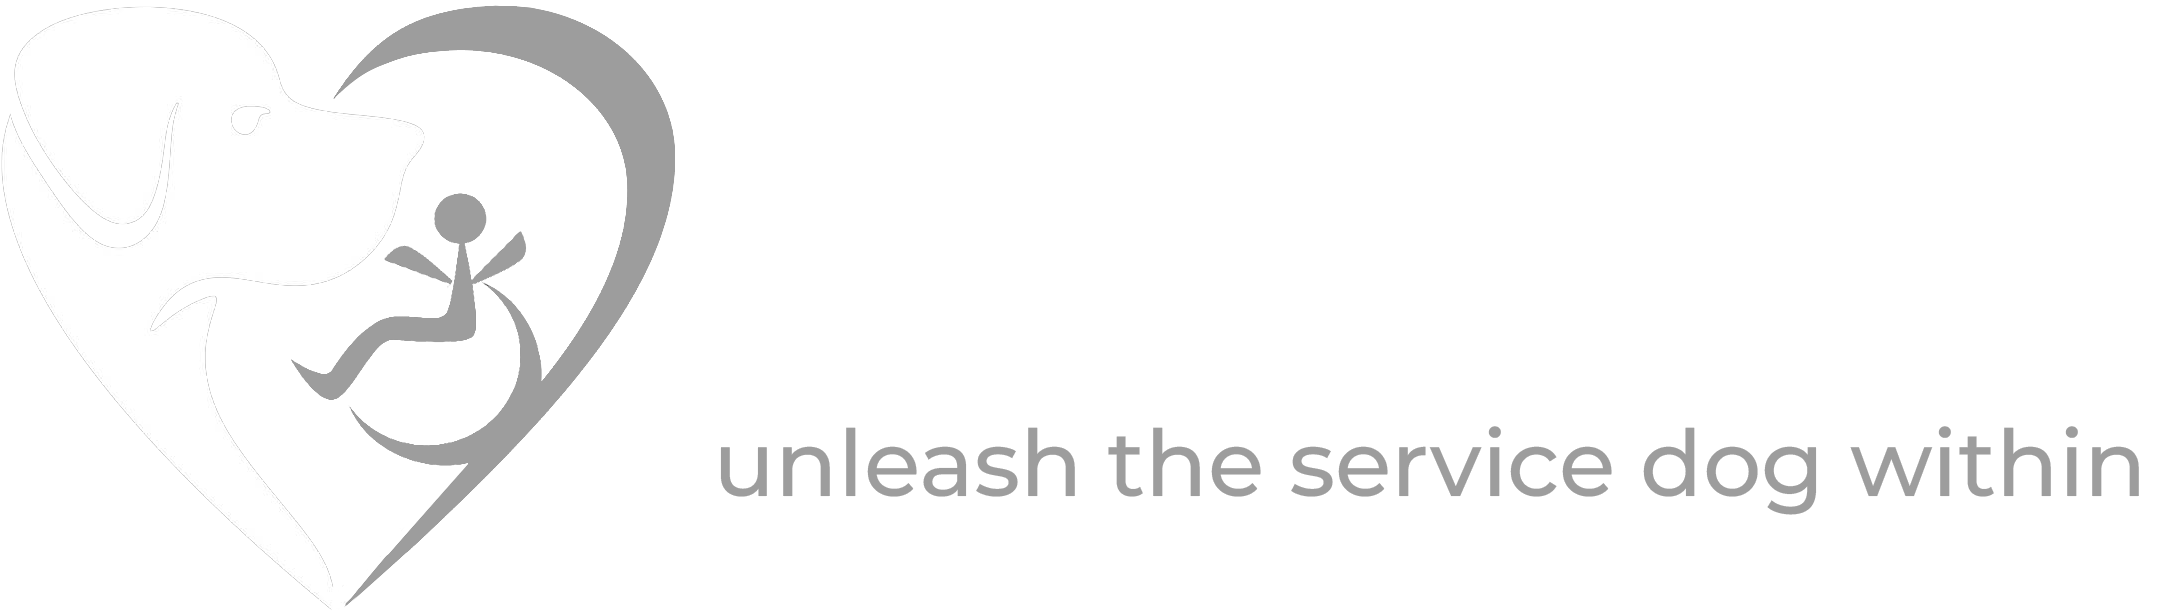 Logo is a heart shape with a dog on one side and a wheelchair on the other. Words say Doggedly - unleash the service dog within